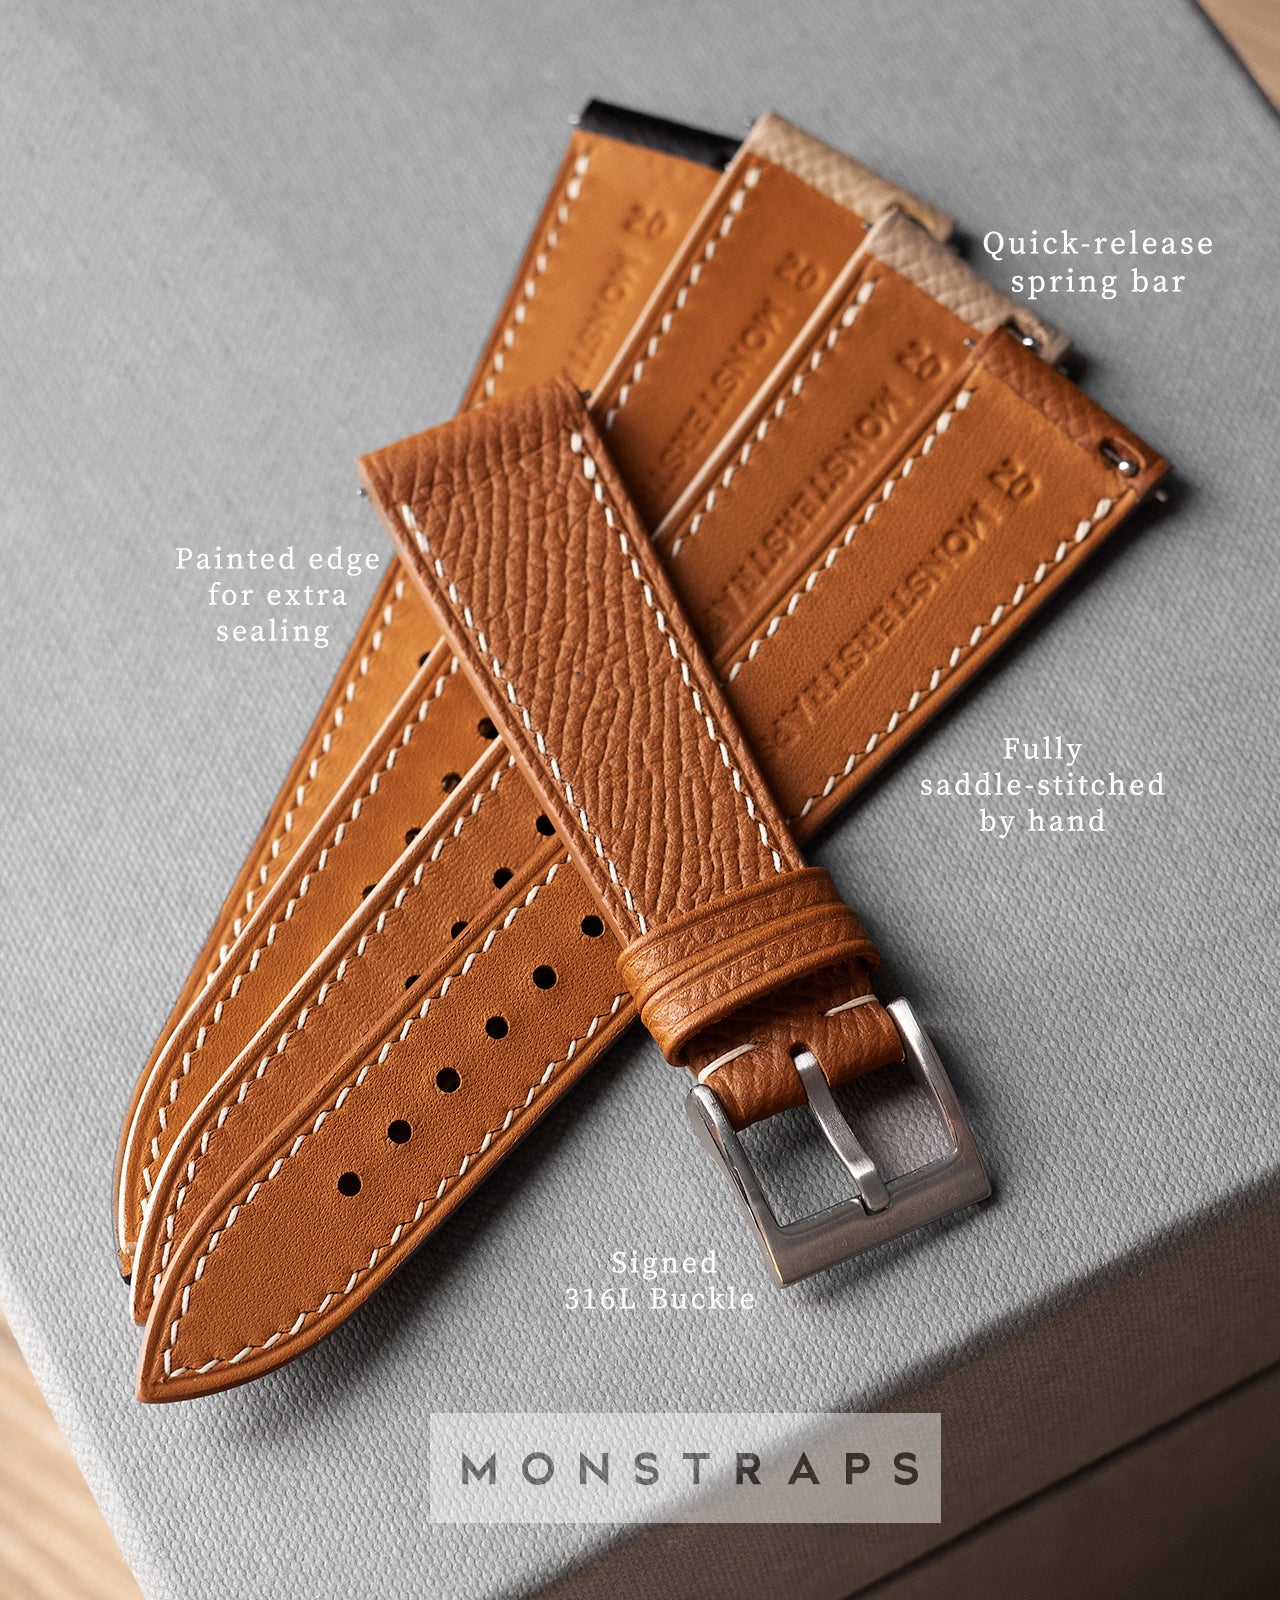 Anyone know how I can get a leather strap that matches the colour